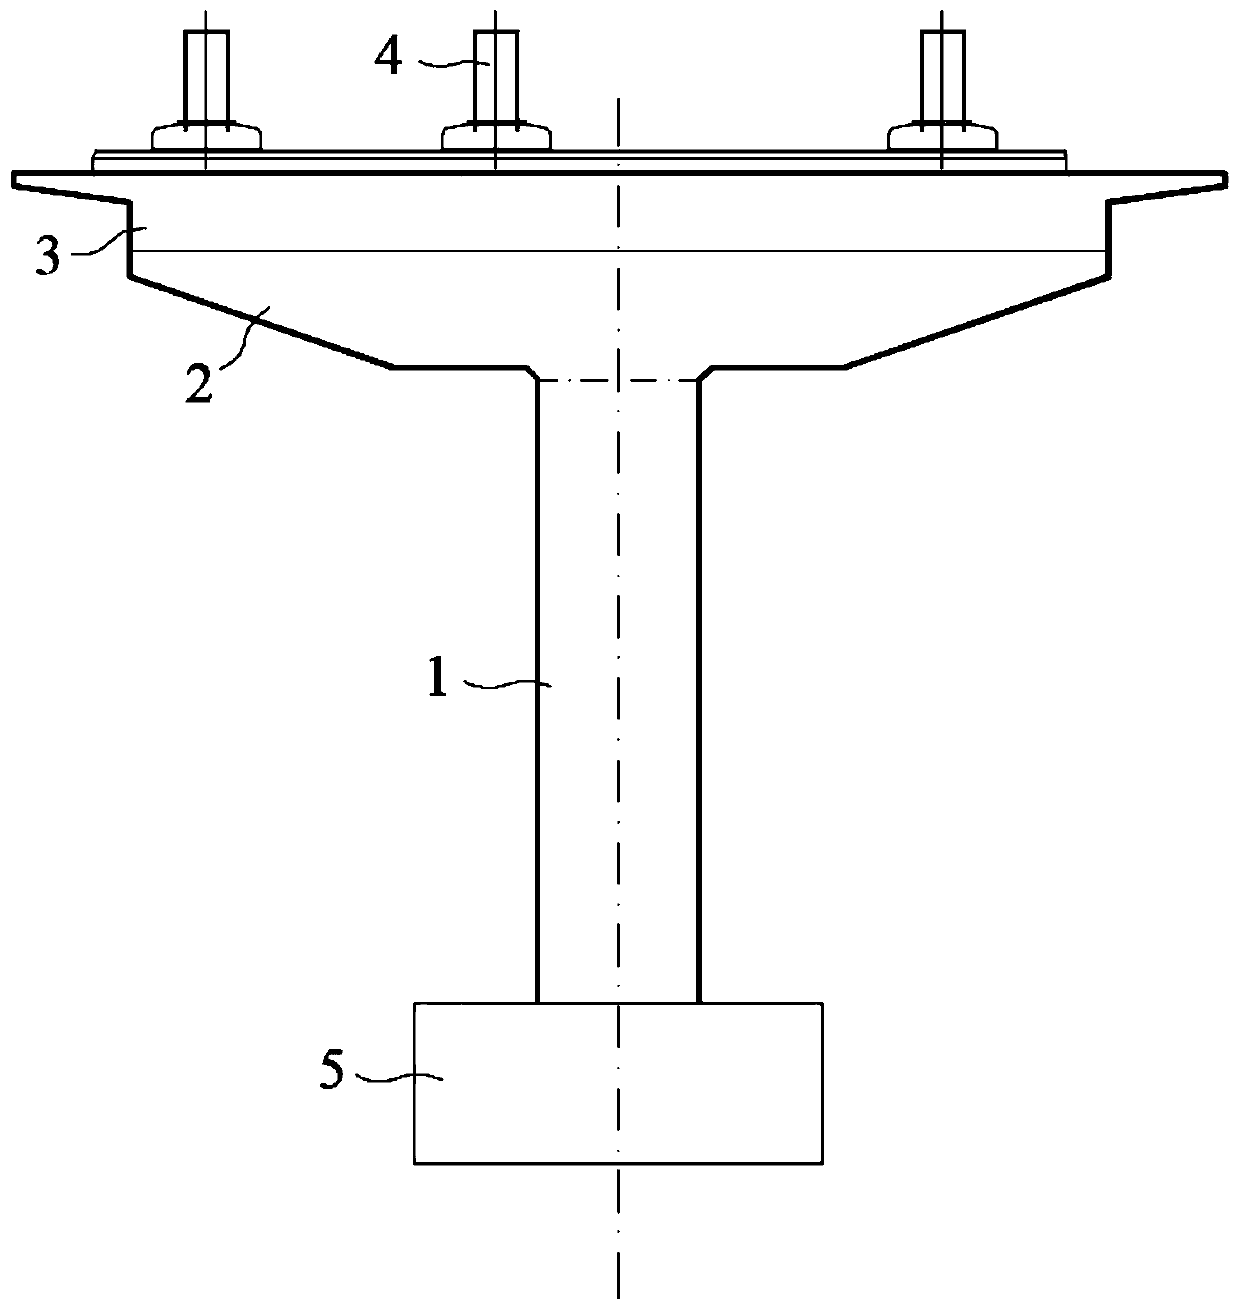 Turnout support system applicable to straddle type monorail